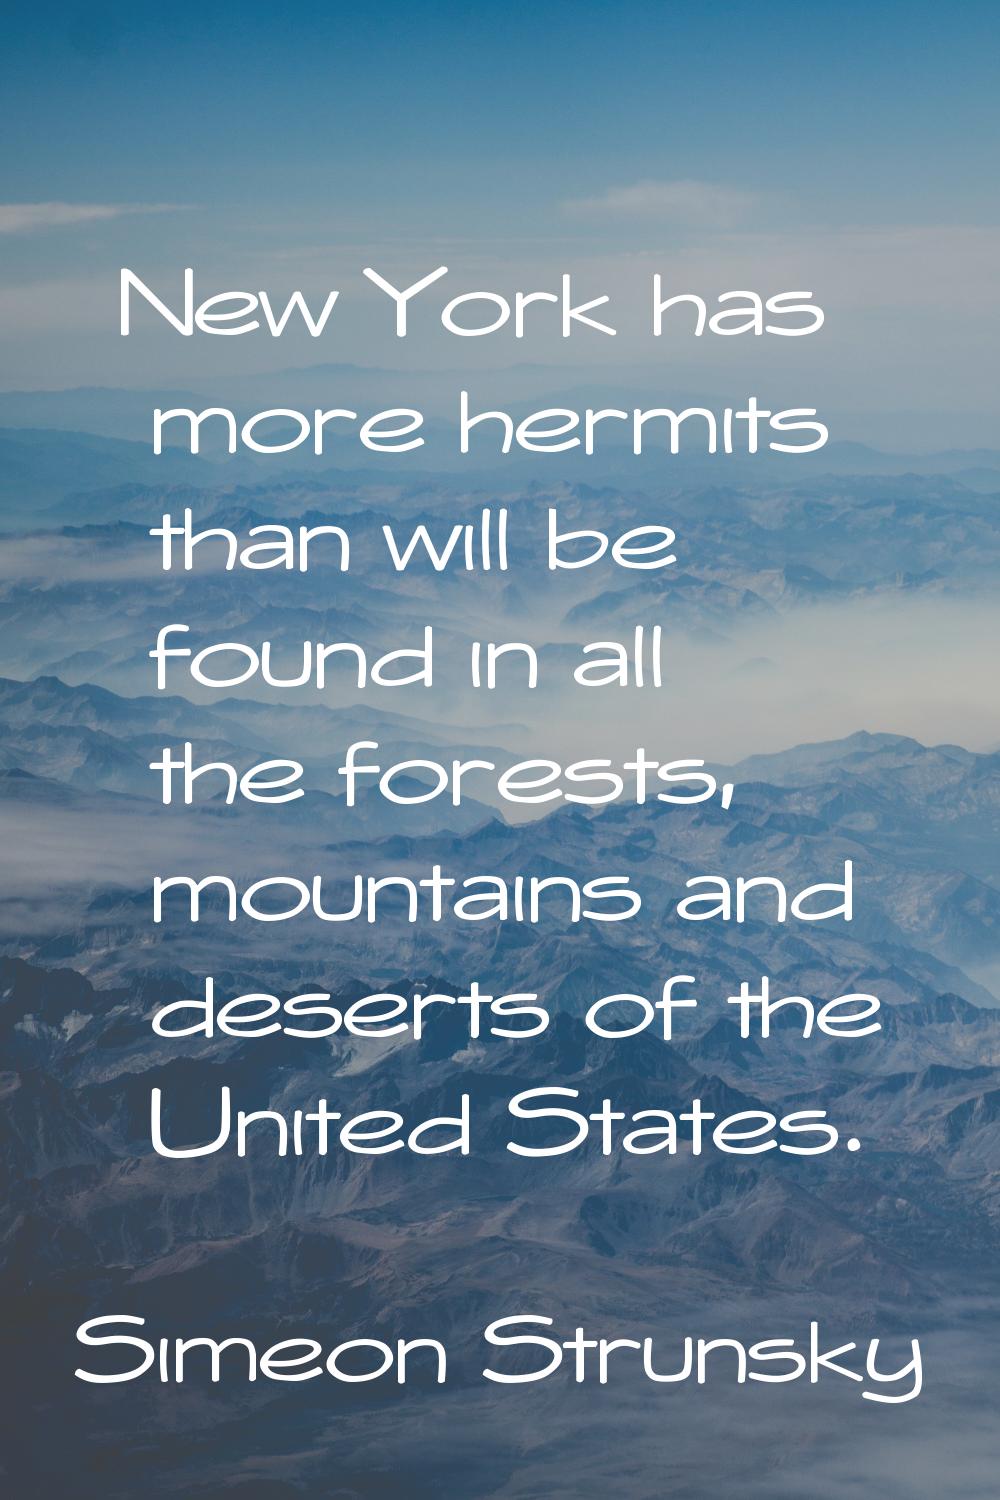 New York has more hermits than will be found in all the forests, mountains and deserts of the Unite